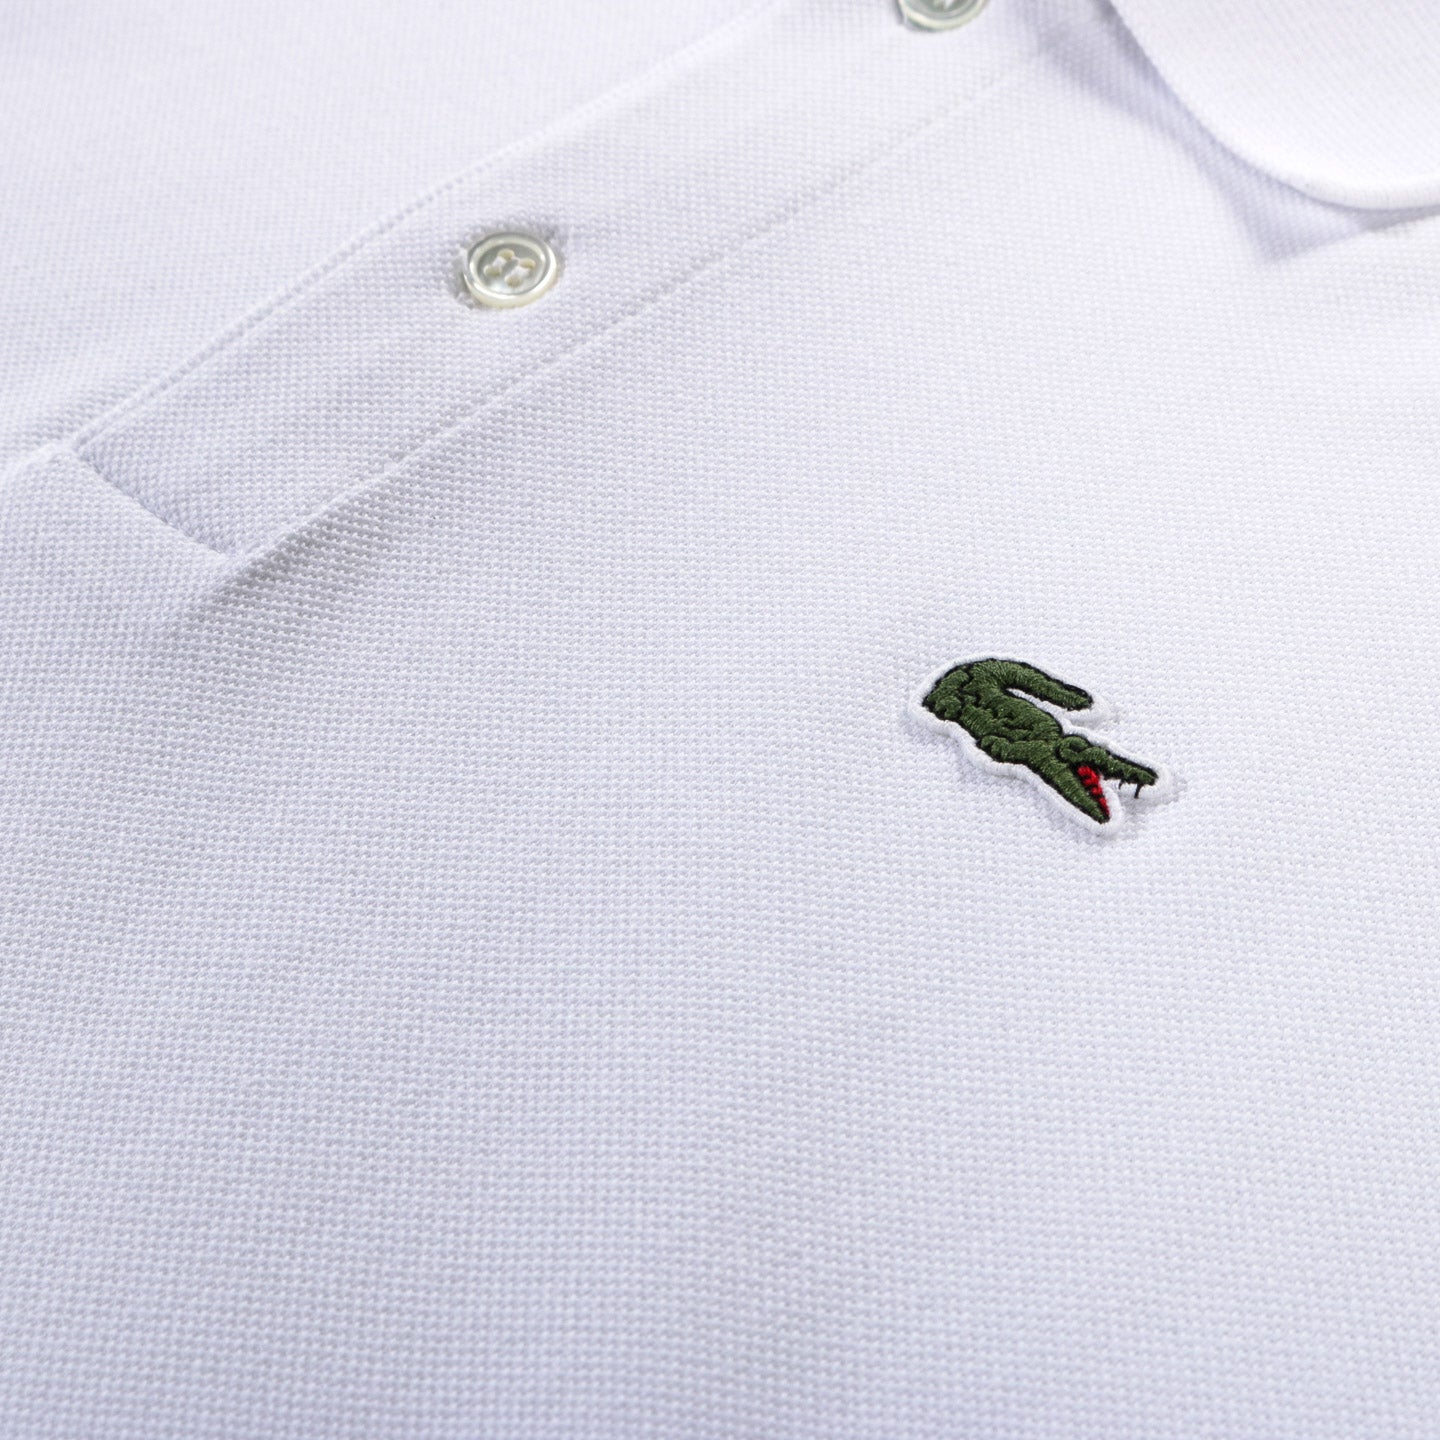 COMME DES GARCONS SHIRT T015 LACOSTE TWISTED POLO WHITE